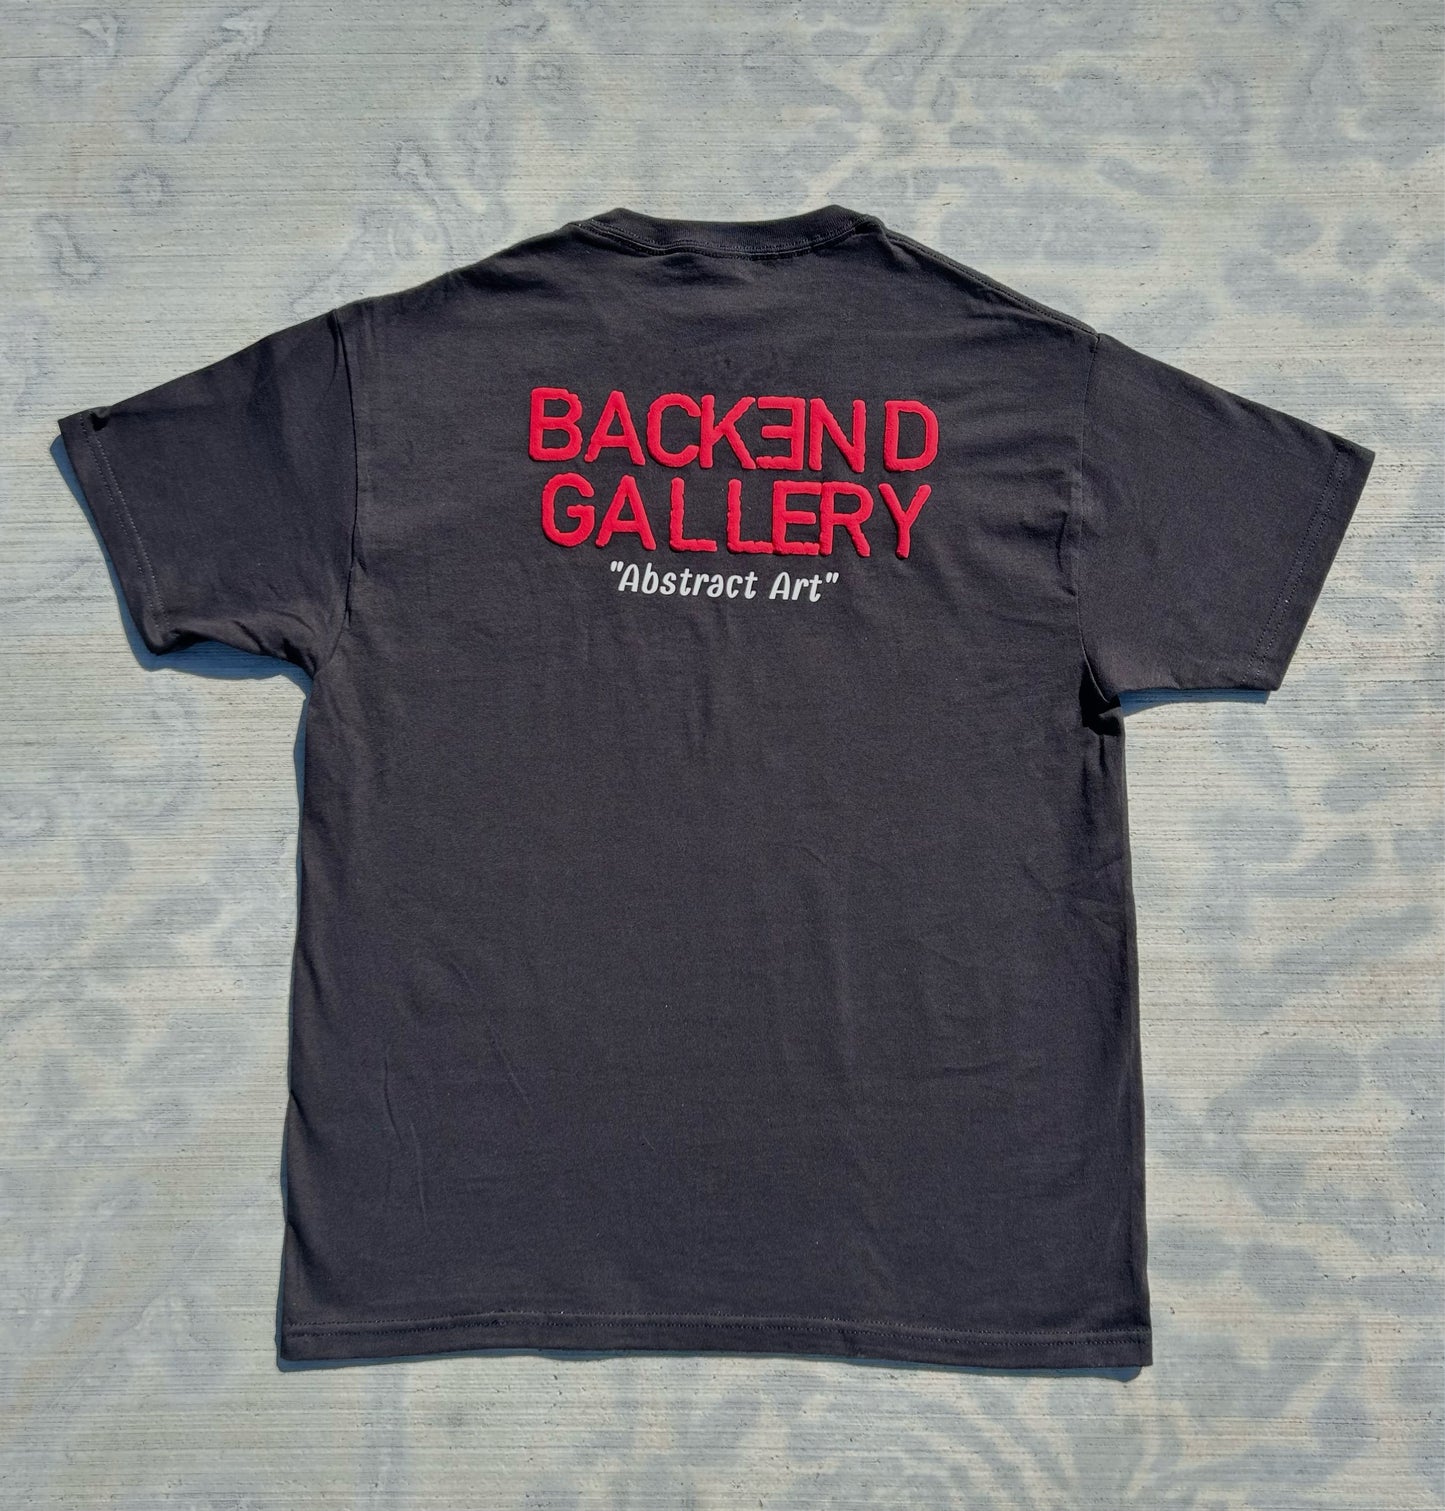 "BACKEND GALLERY" TEE